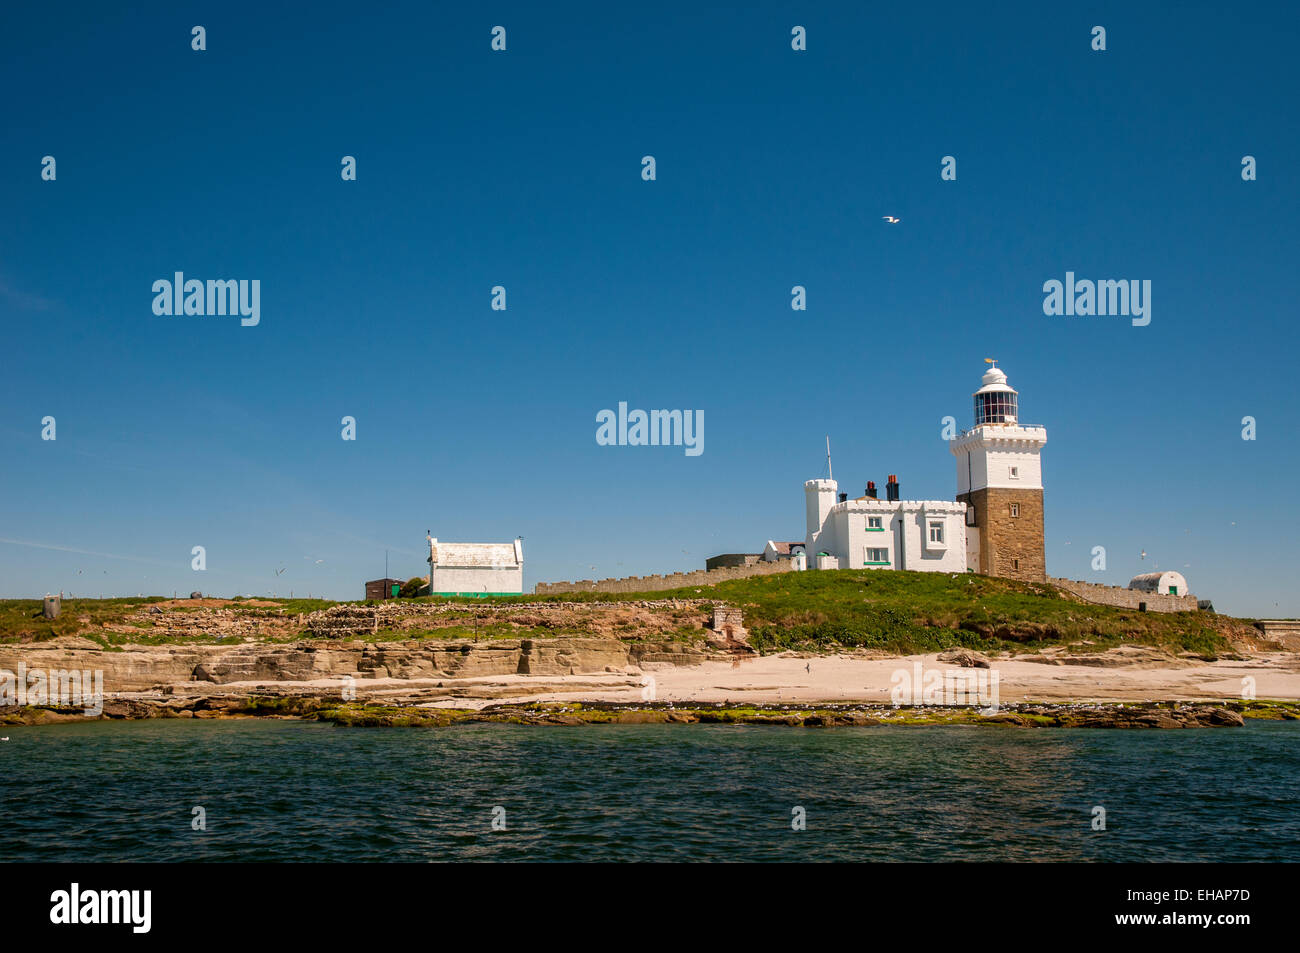 The lighthouse and beach on Coquet Island bird reserve seen from just offshore, Amble Northumberland. June. Stock Photo